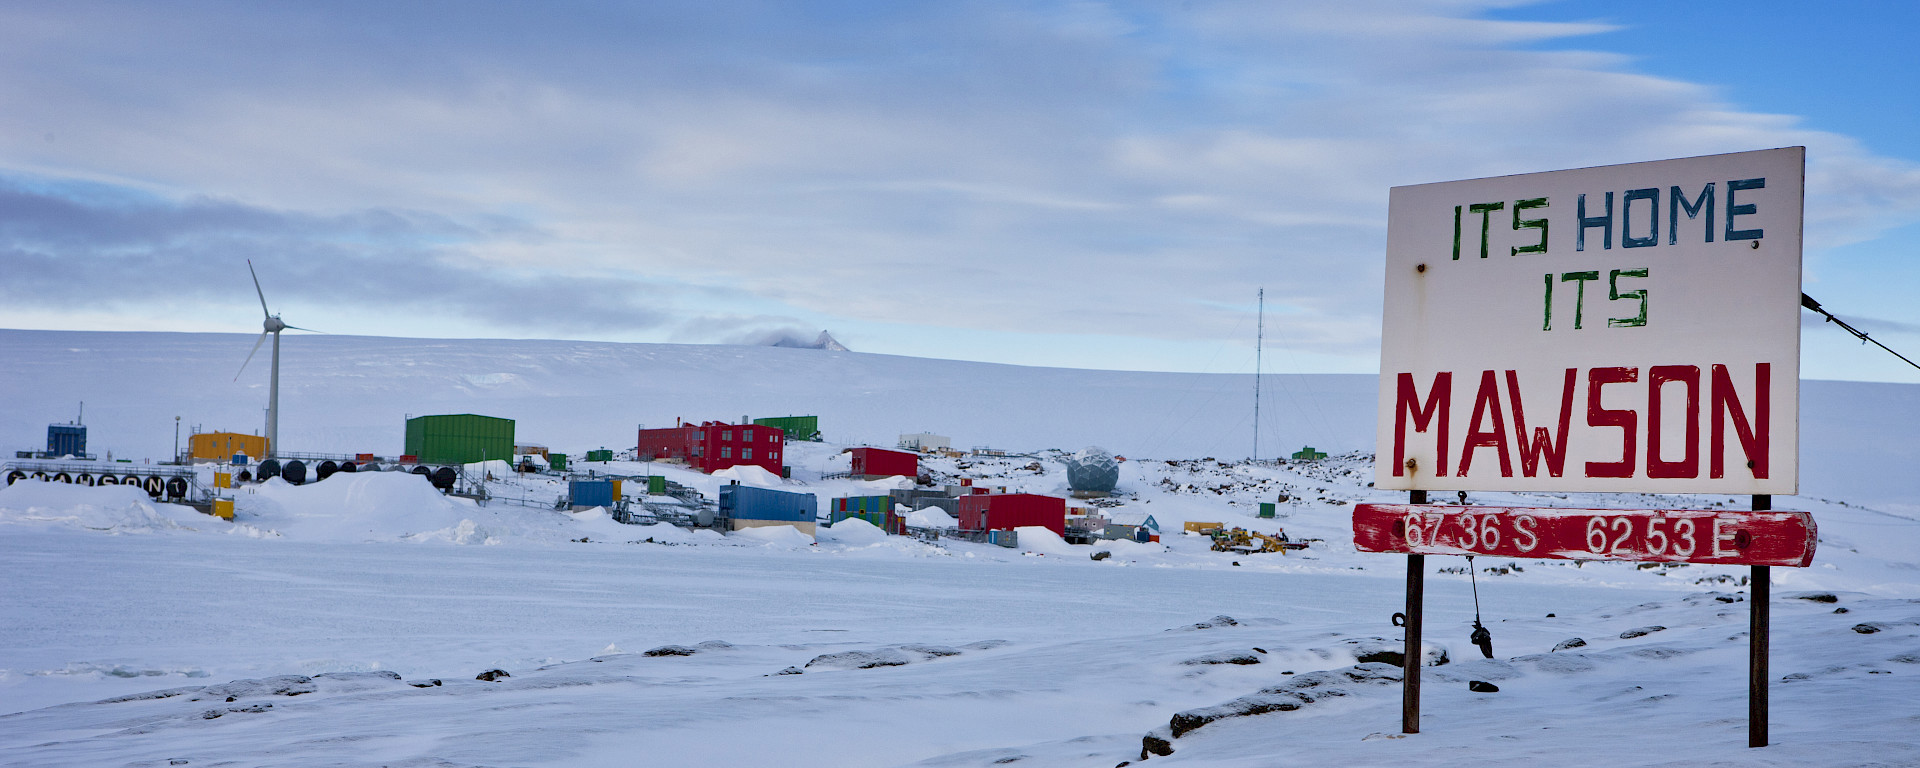 Mawson Station, the furthest south of Australia's Antarctic Bases.